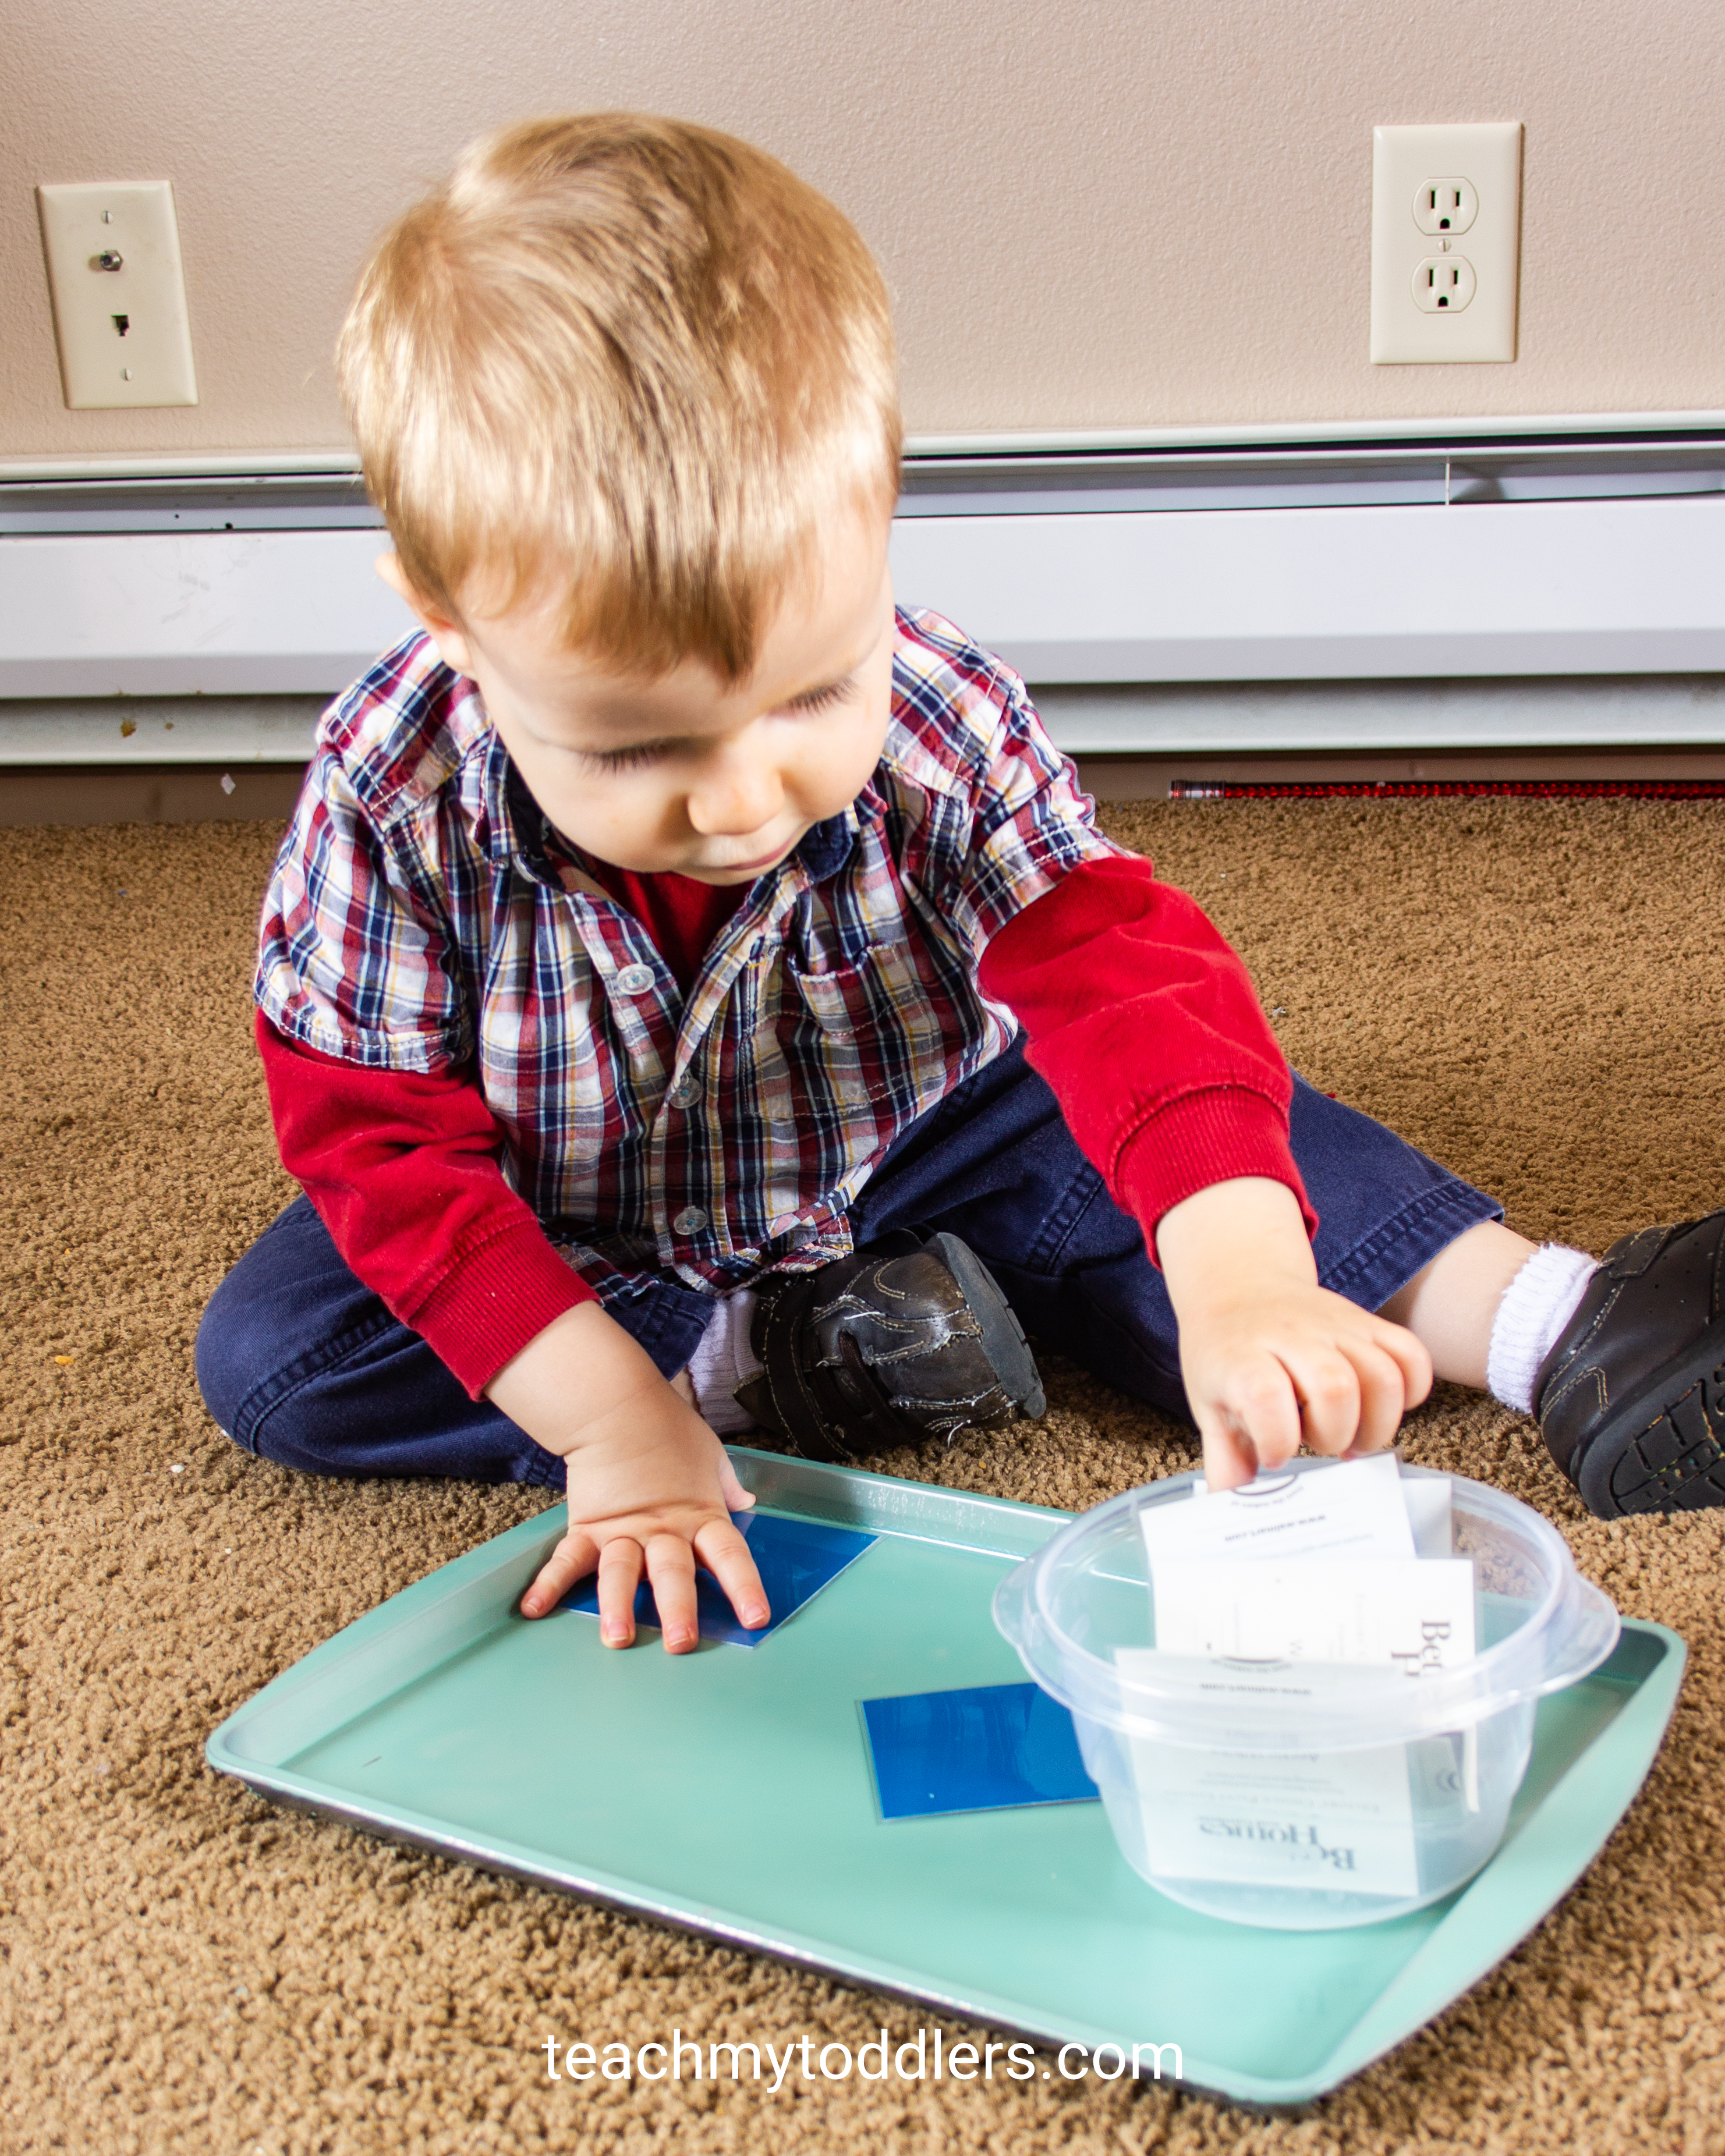 Use these great winter activities to teach your toddlers about winter